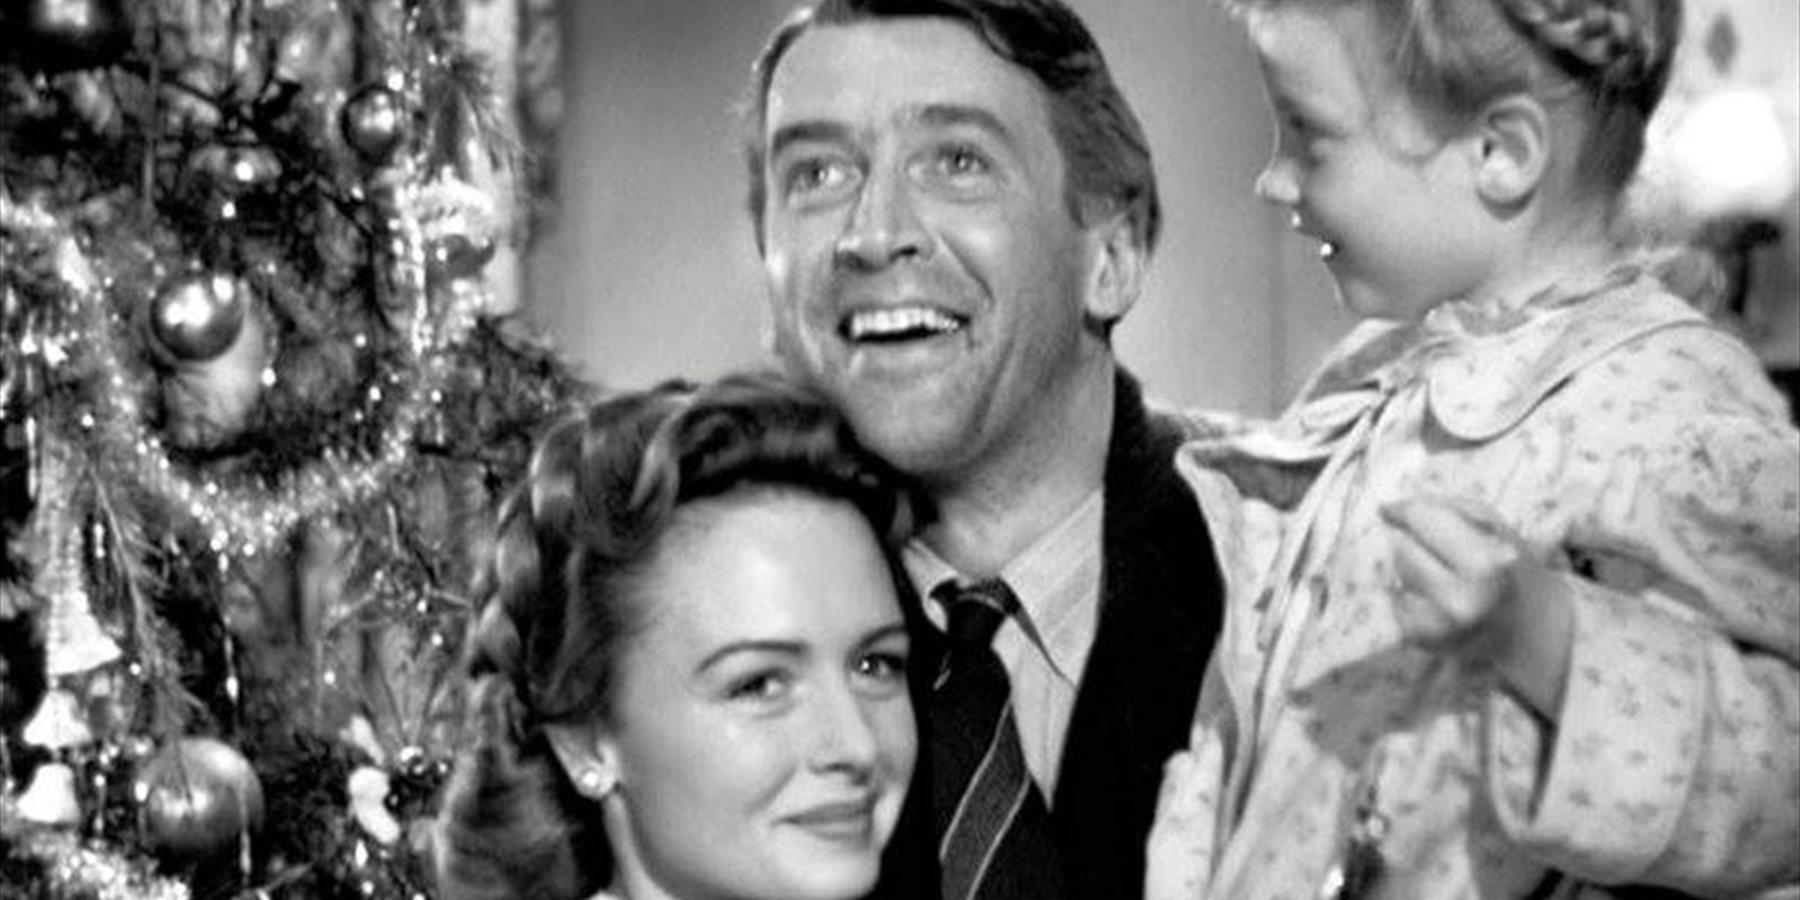 A shot from It's a Wonderful Life